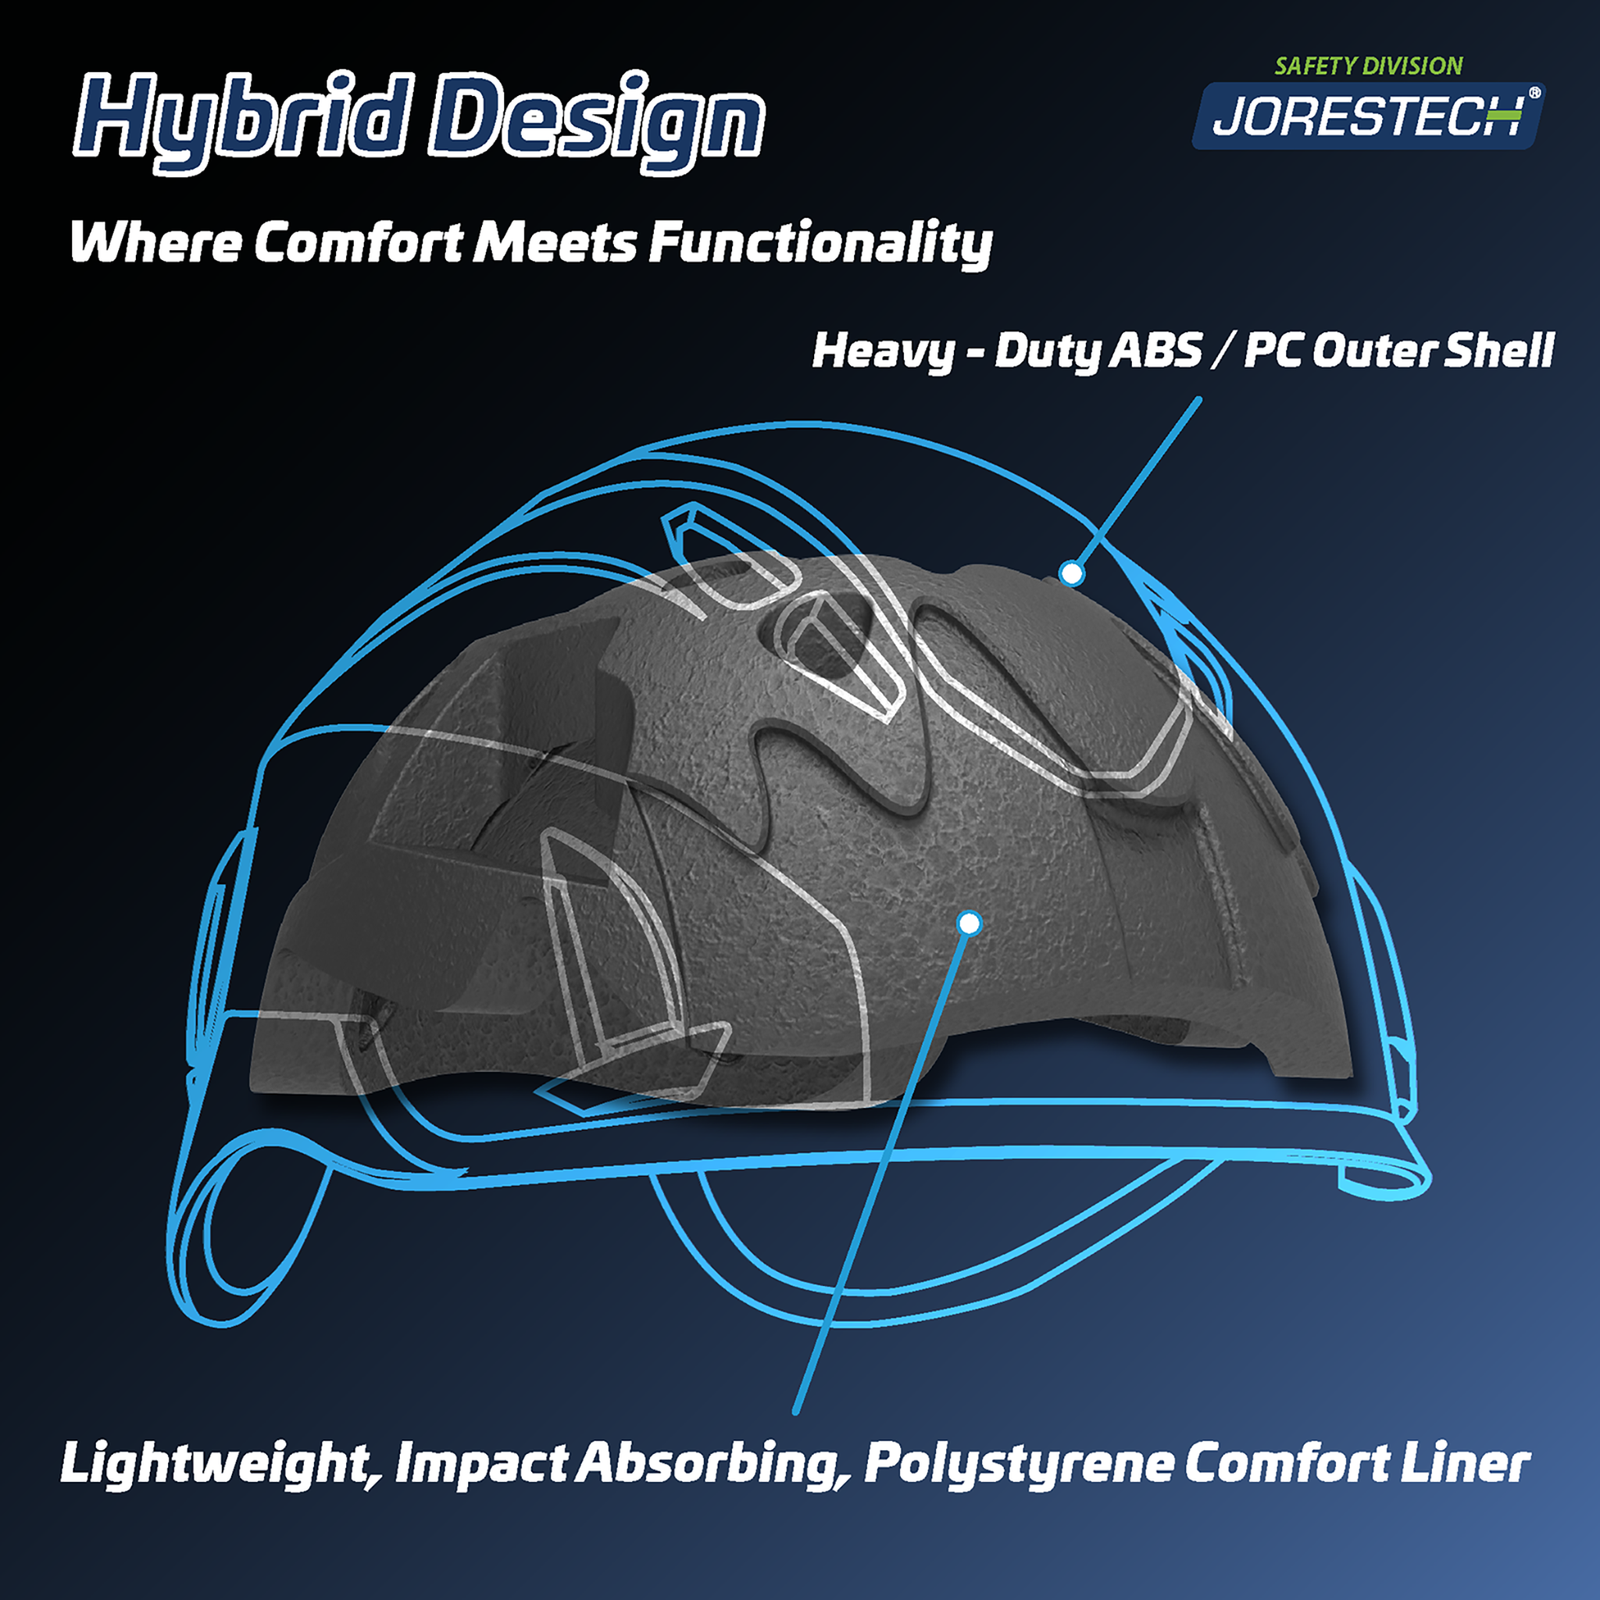 Banner of the inner liner that is part of the JORESTECH climbing hard hat, that offers improved protection. Text reads: Hybrid design, where comfort meets functionality . Heavy duty ABS/PC outer shell. Lightweight, impart absorbing, polystyrene comfort liner